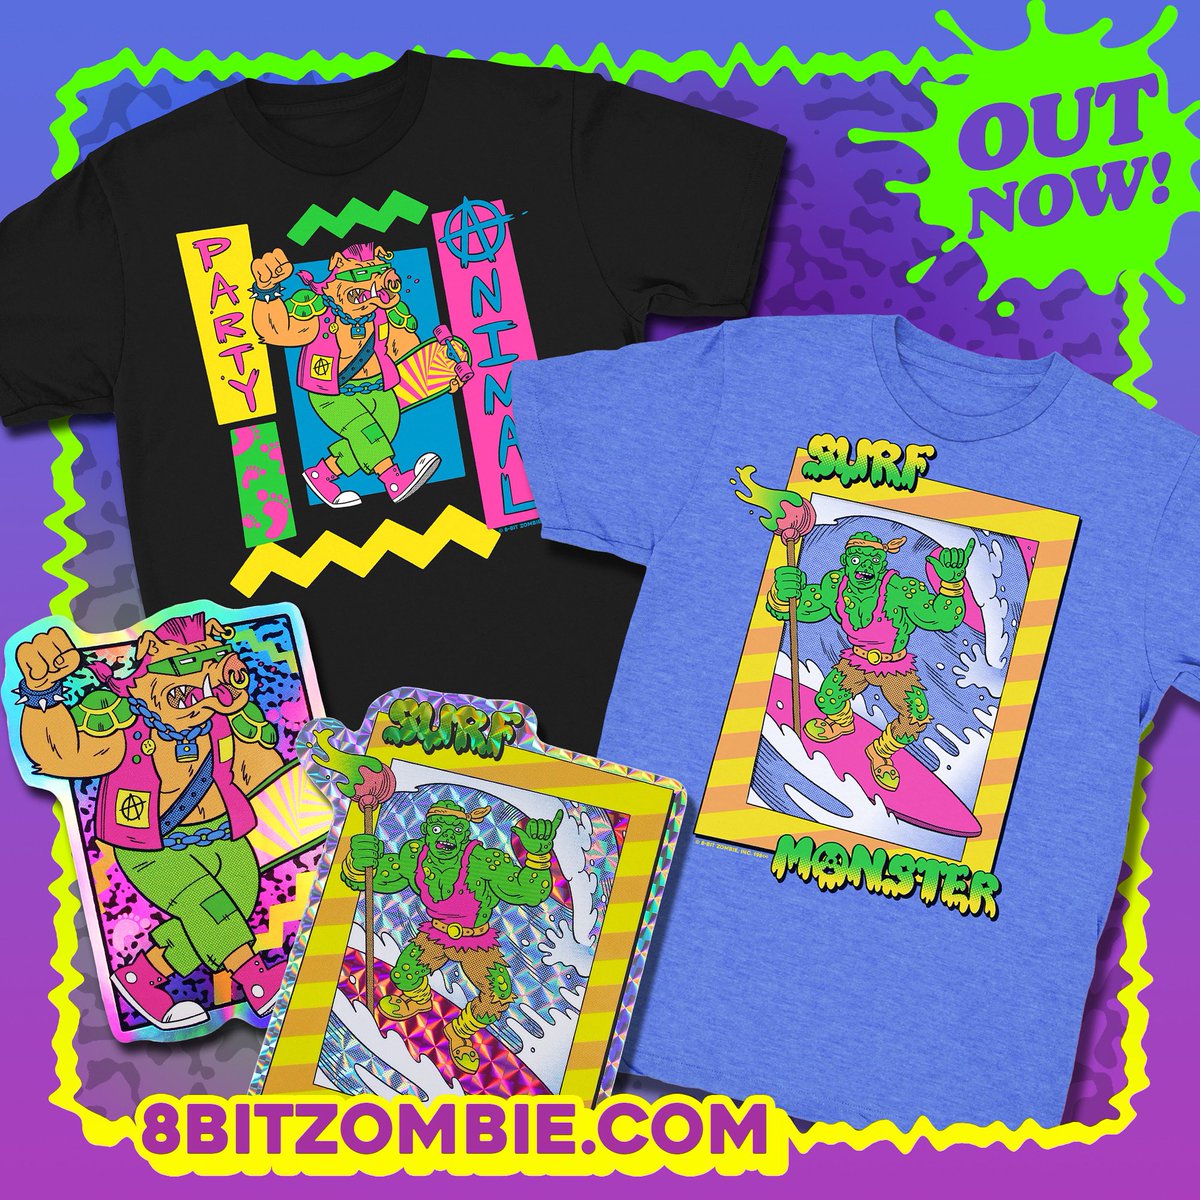 One more heads up on these nuclear neon tees, just in case you missed it. These day-glow designs are going fast, so get’em while they last! Thanks so much for the awesome response on this stuff and happy Friday! 💚☢️💙 8BITZOMBIE.COM